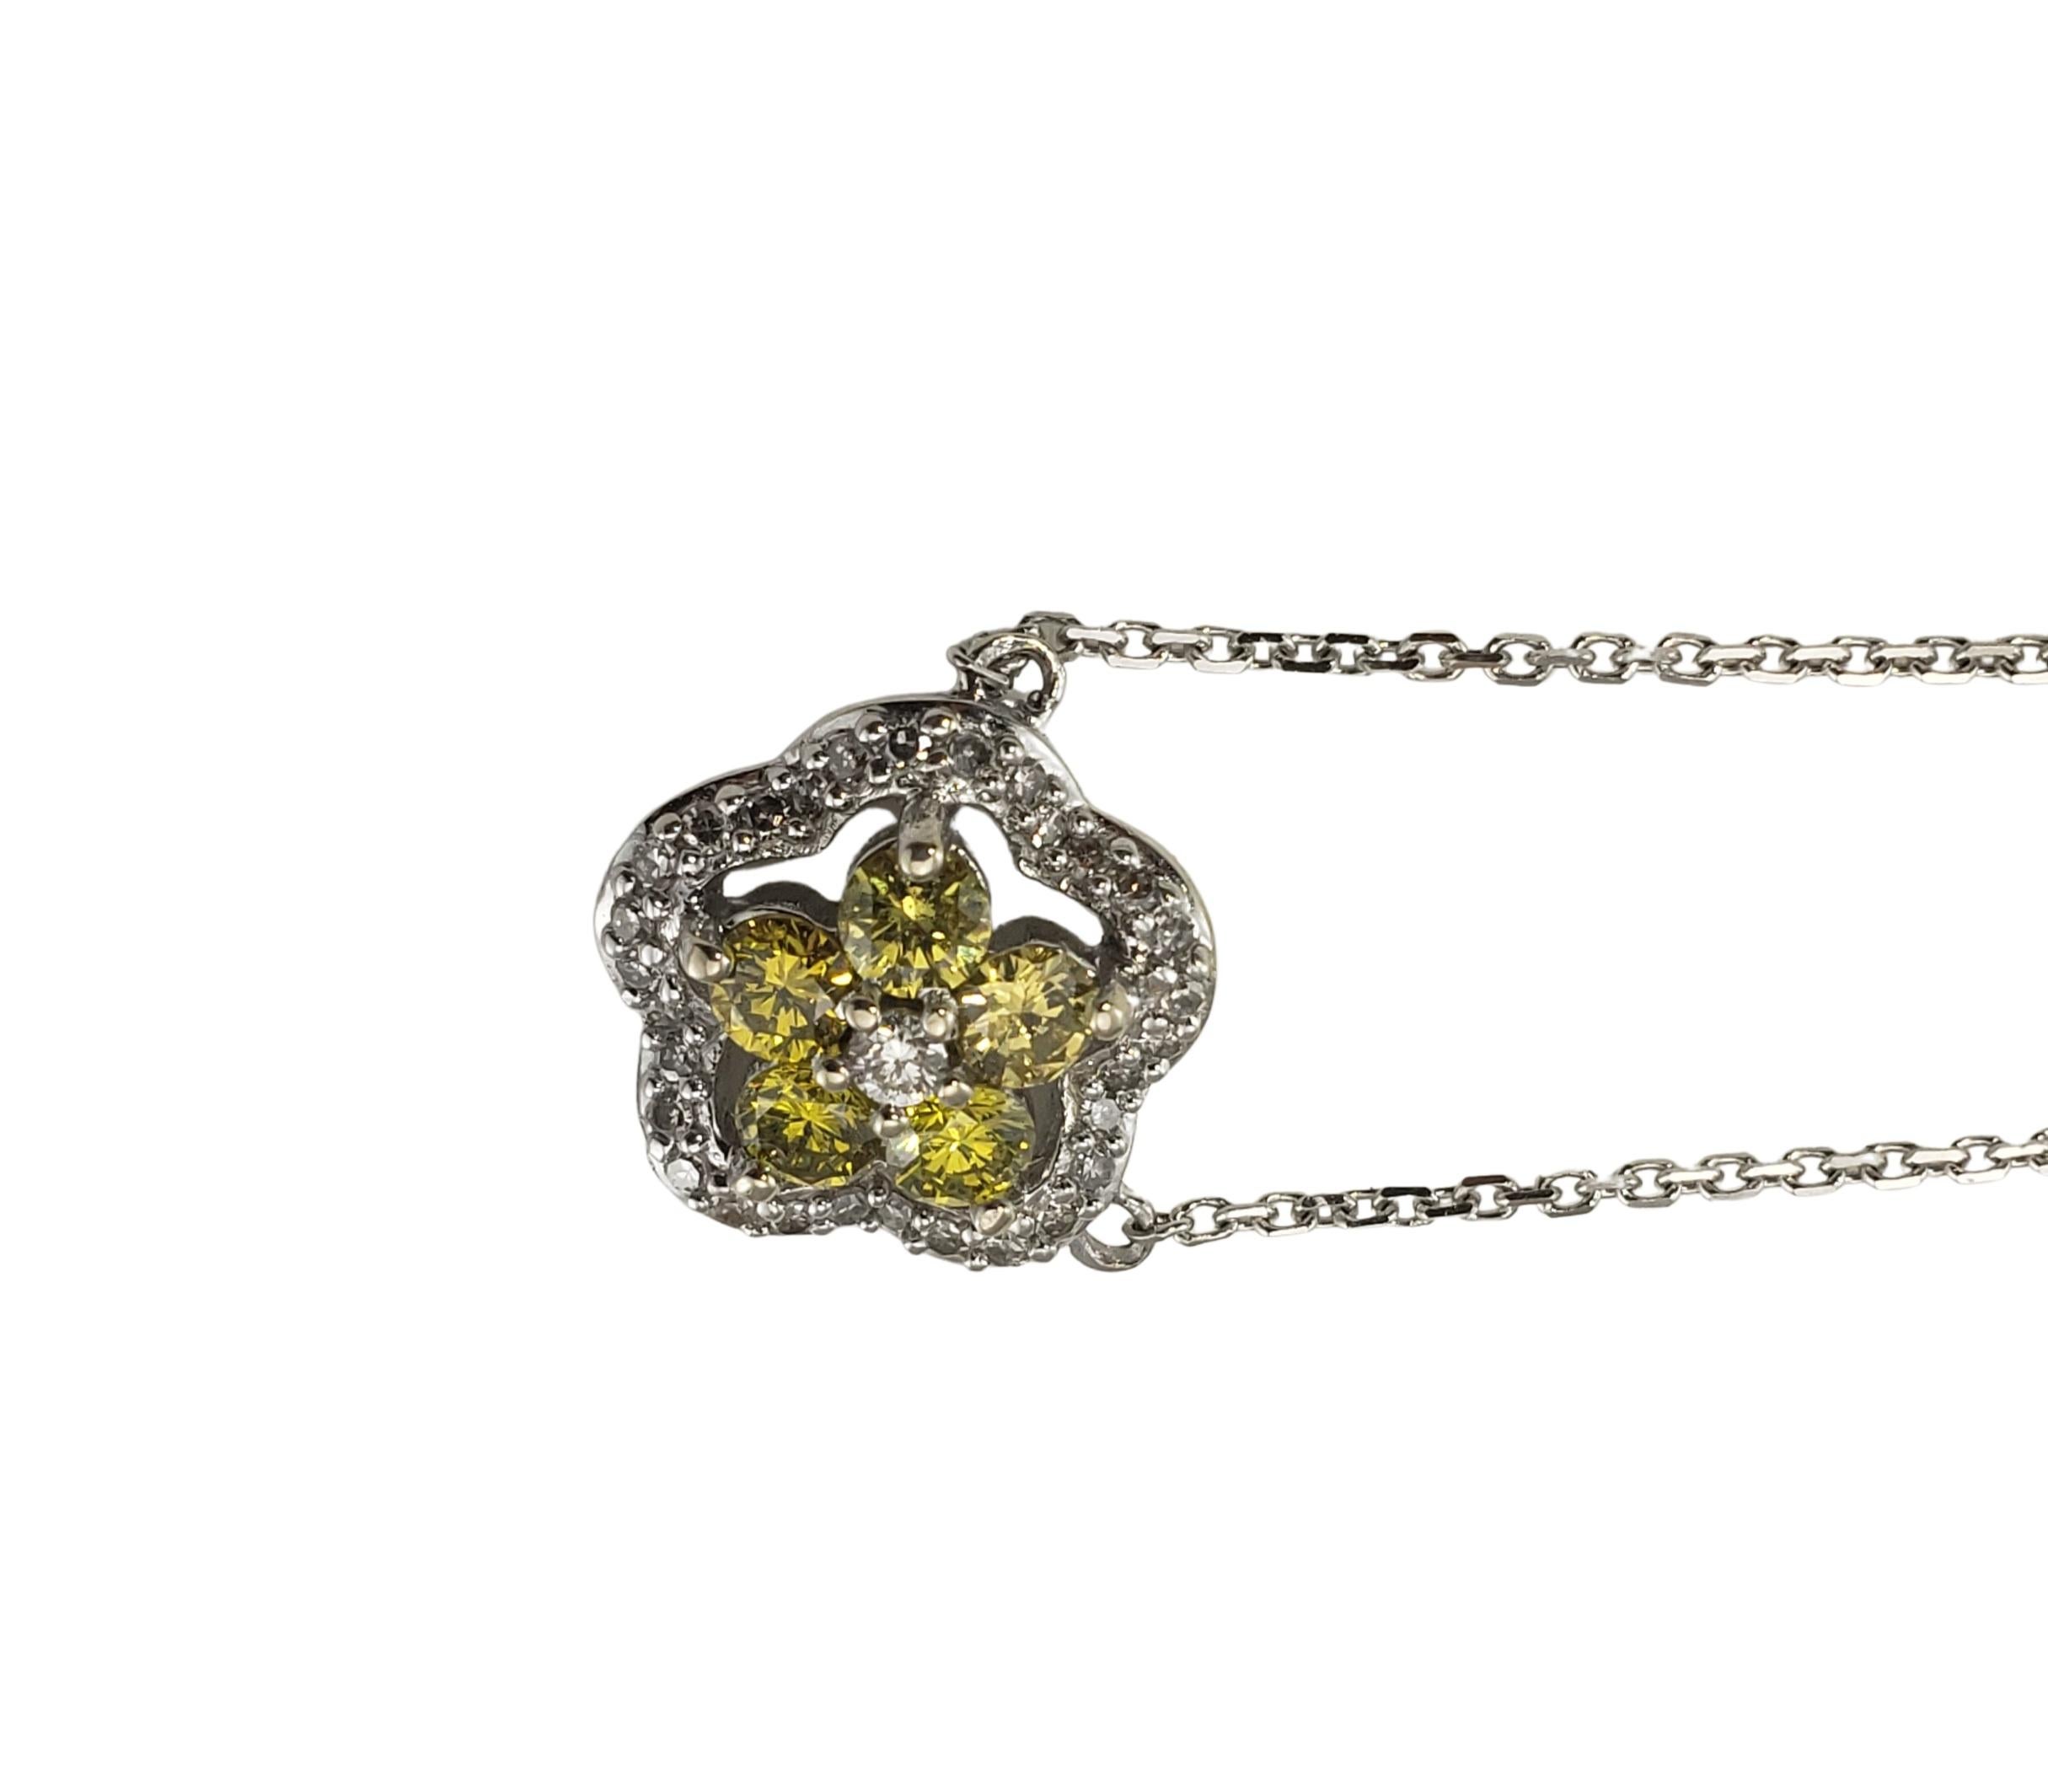 14 Karat White/Yellow Gold and Diamond Pendant Necklace GAI Certified-

This sparkling pendant features five round yellow single cut diamonds and 30 round white brilliant cut diamonds set in classic 14K white gold.  Suspends from a classic cable